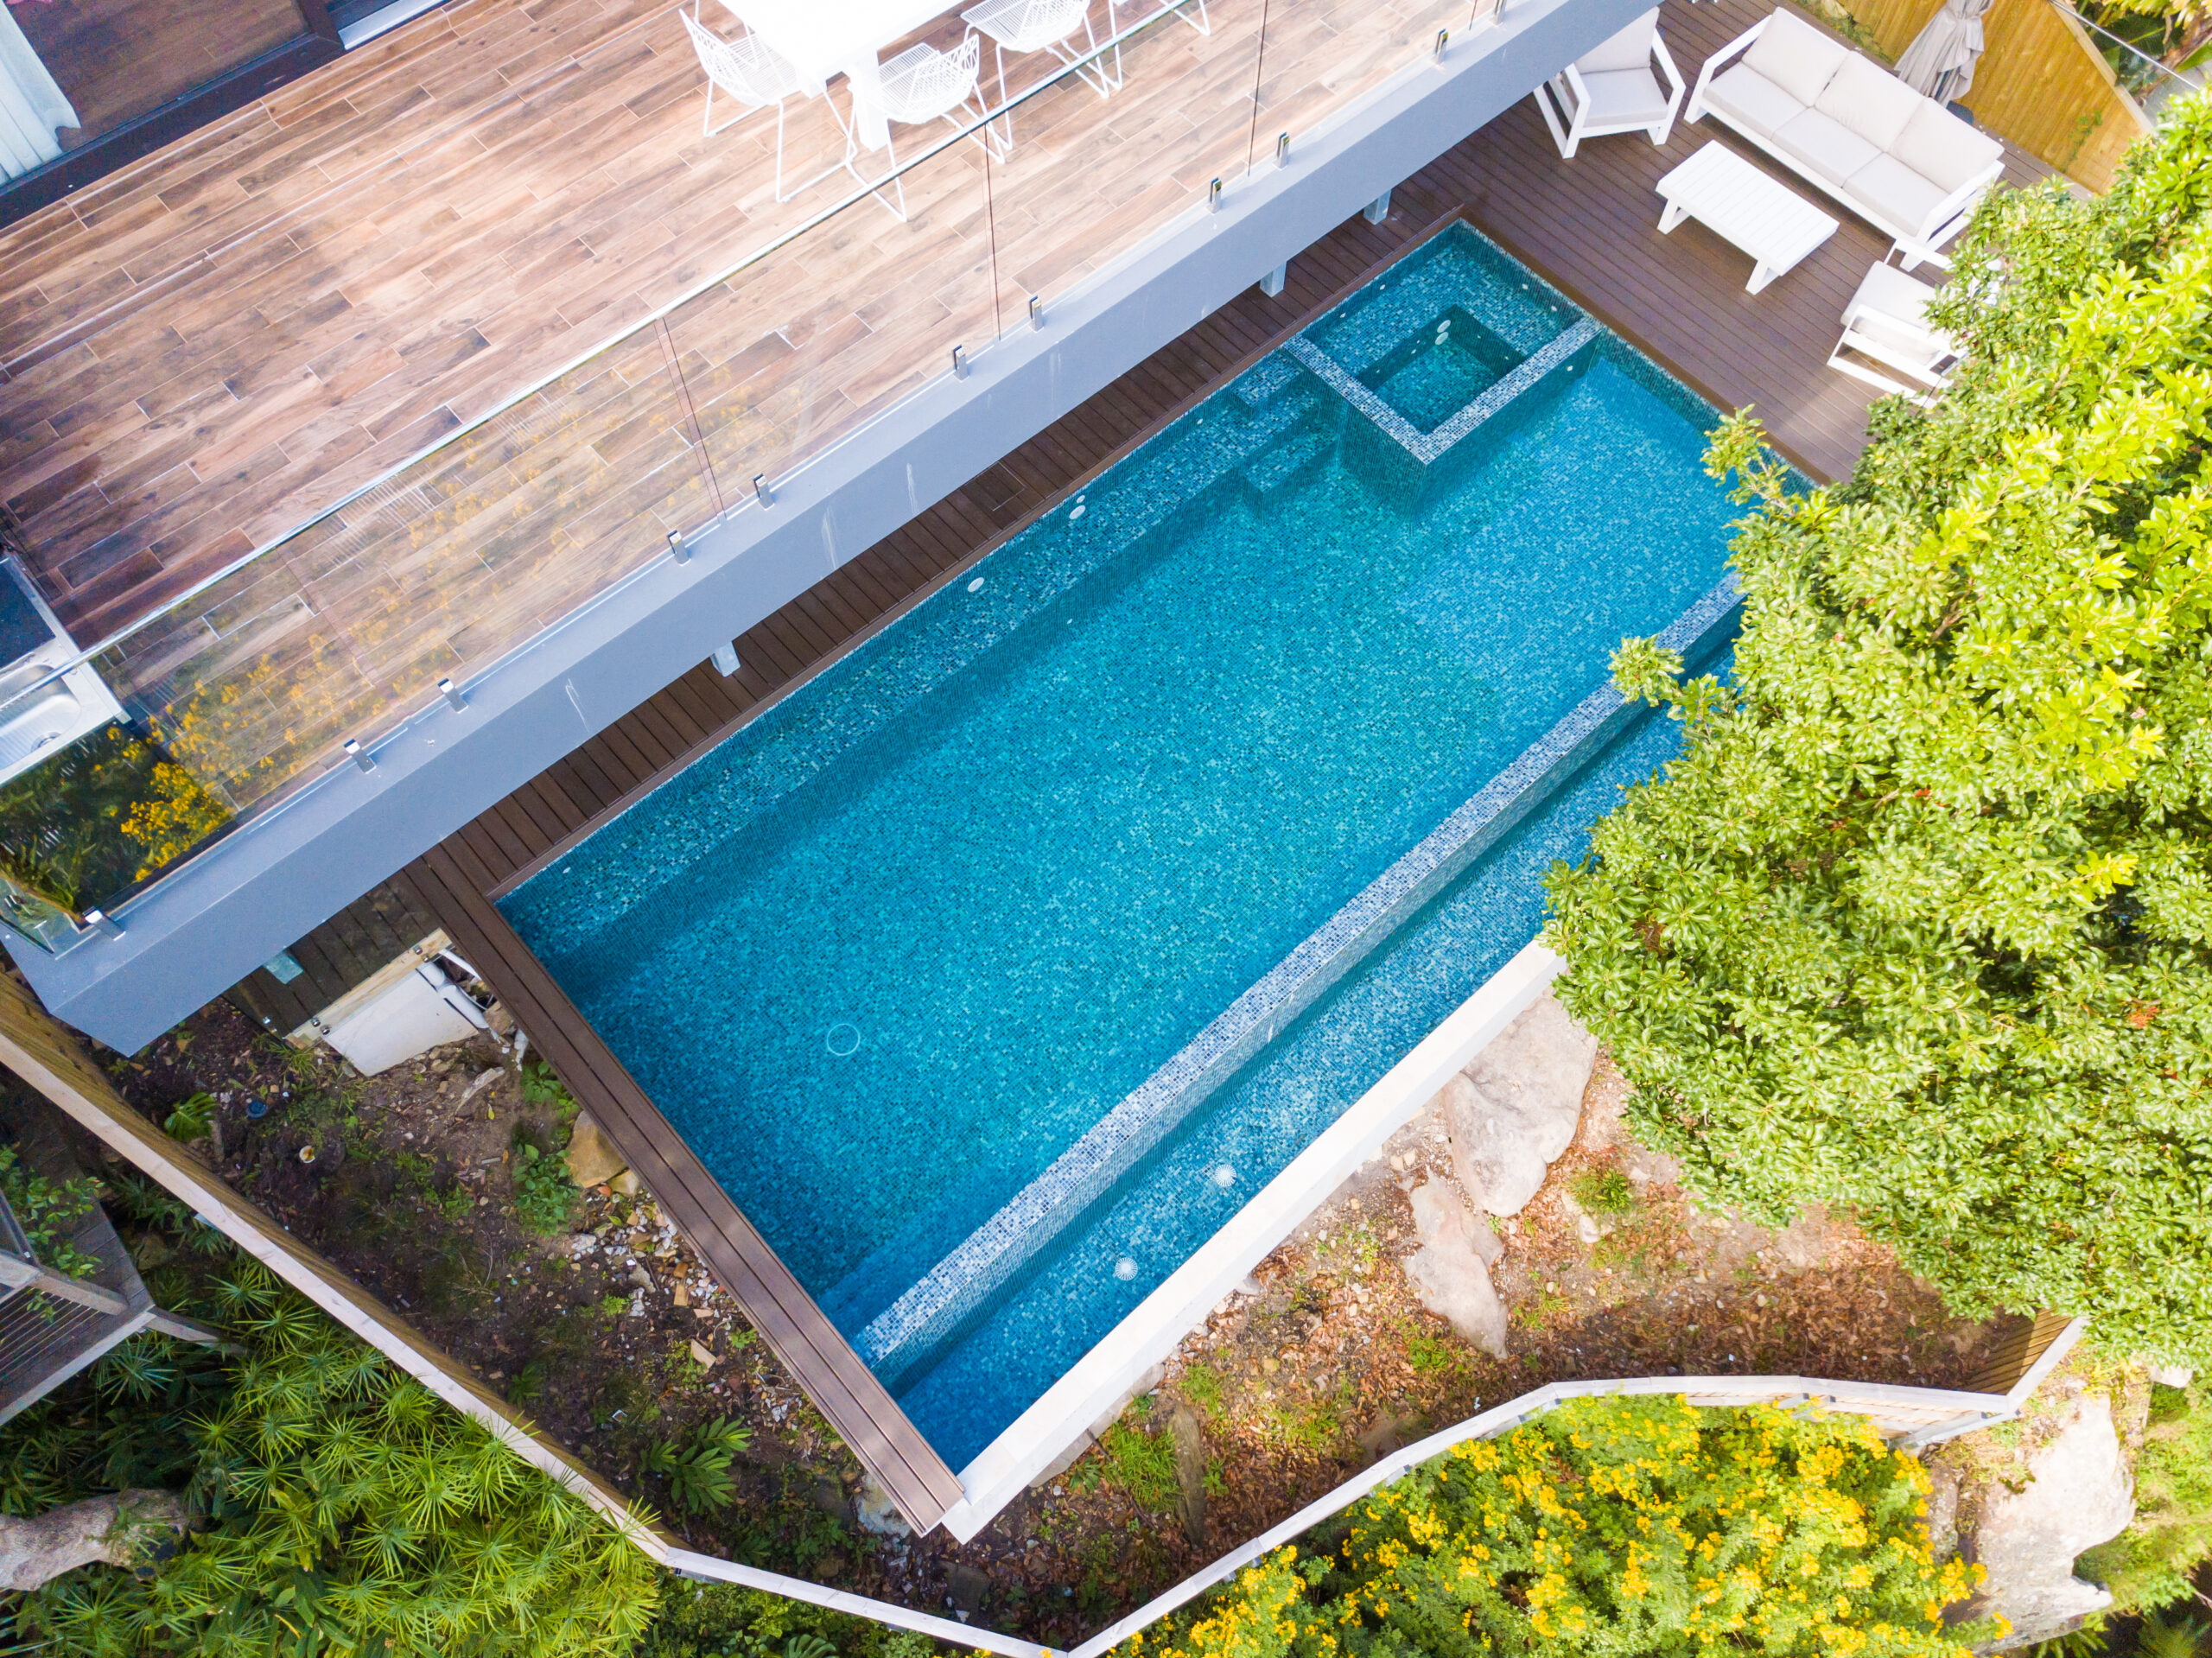 Pool Ideas: Transform Your Backyard into a Personal Oasis